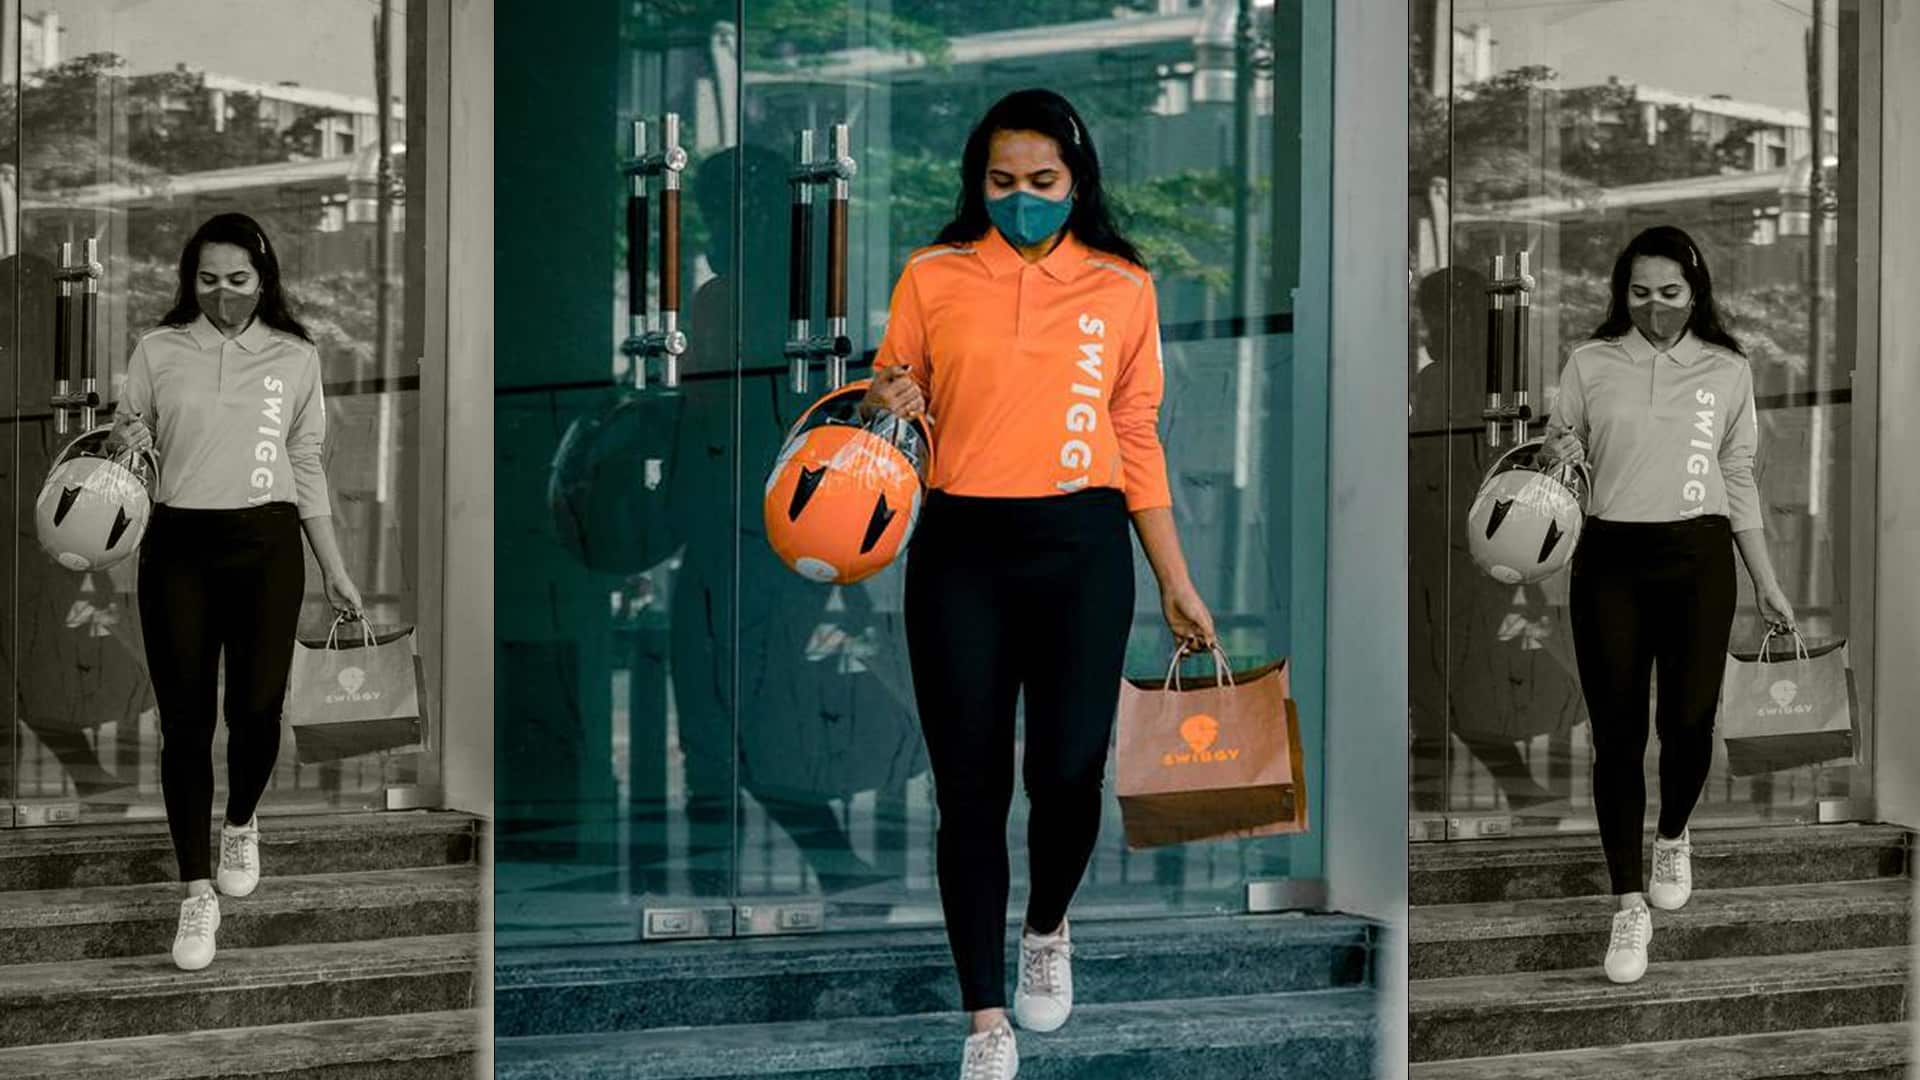 Swiggy introduces sexual harassment redressal policy for its women delivery executives